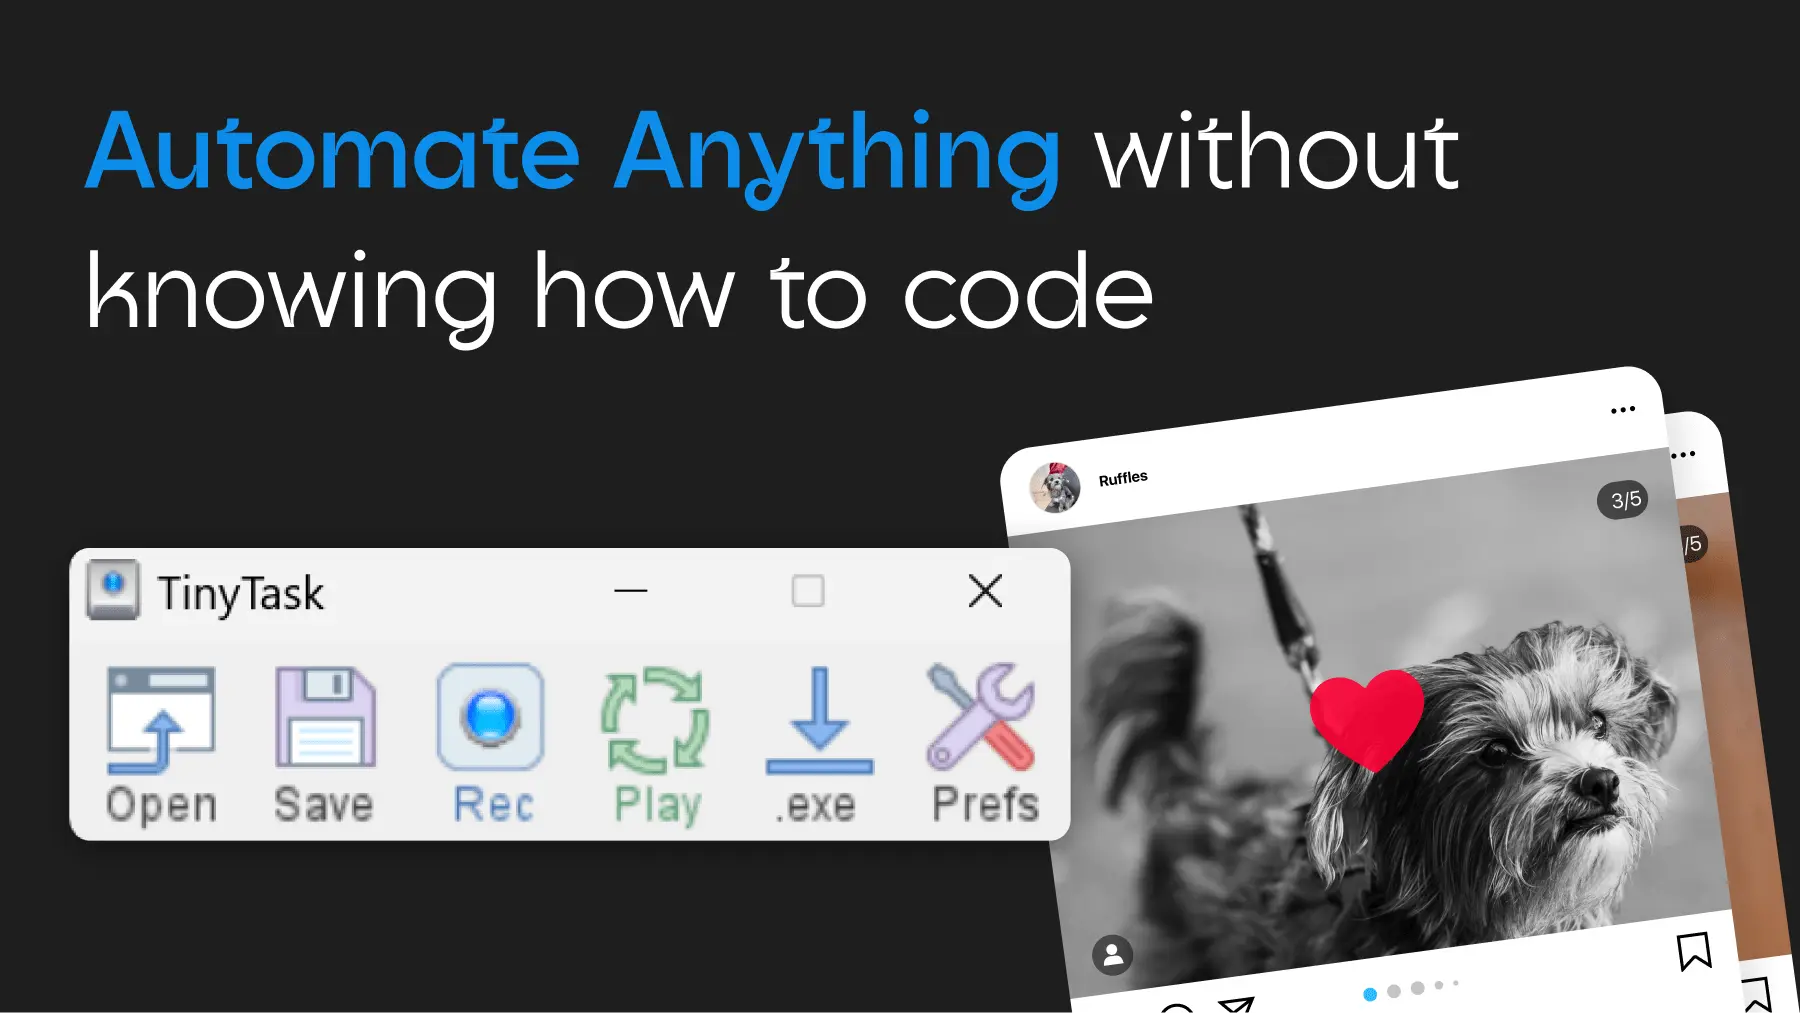 Automate anything without knowing how to code with TinyTask